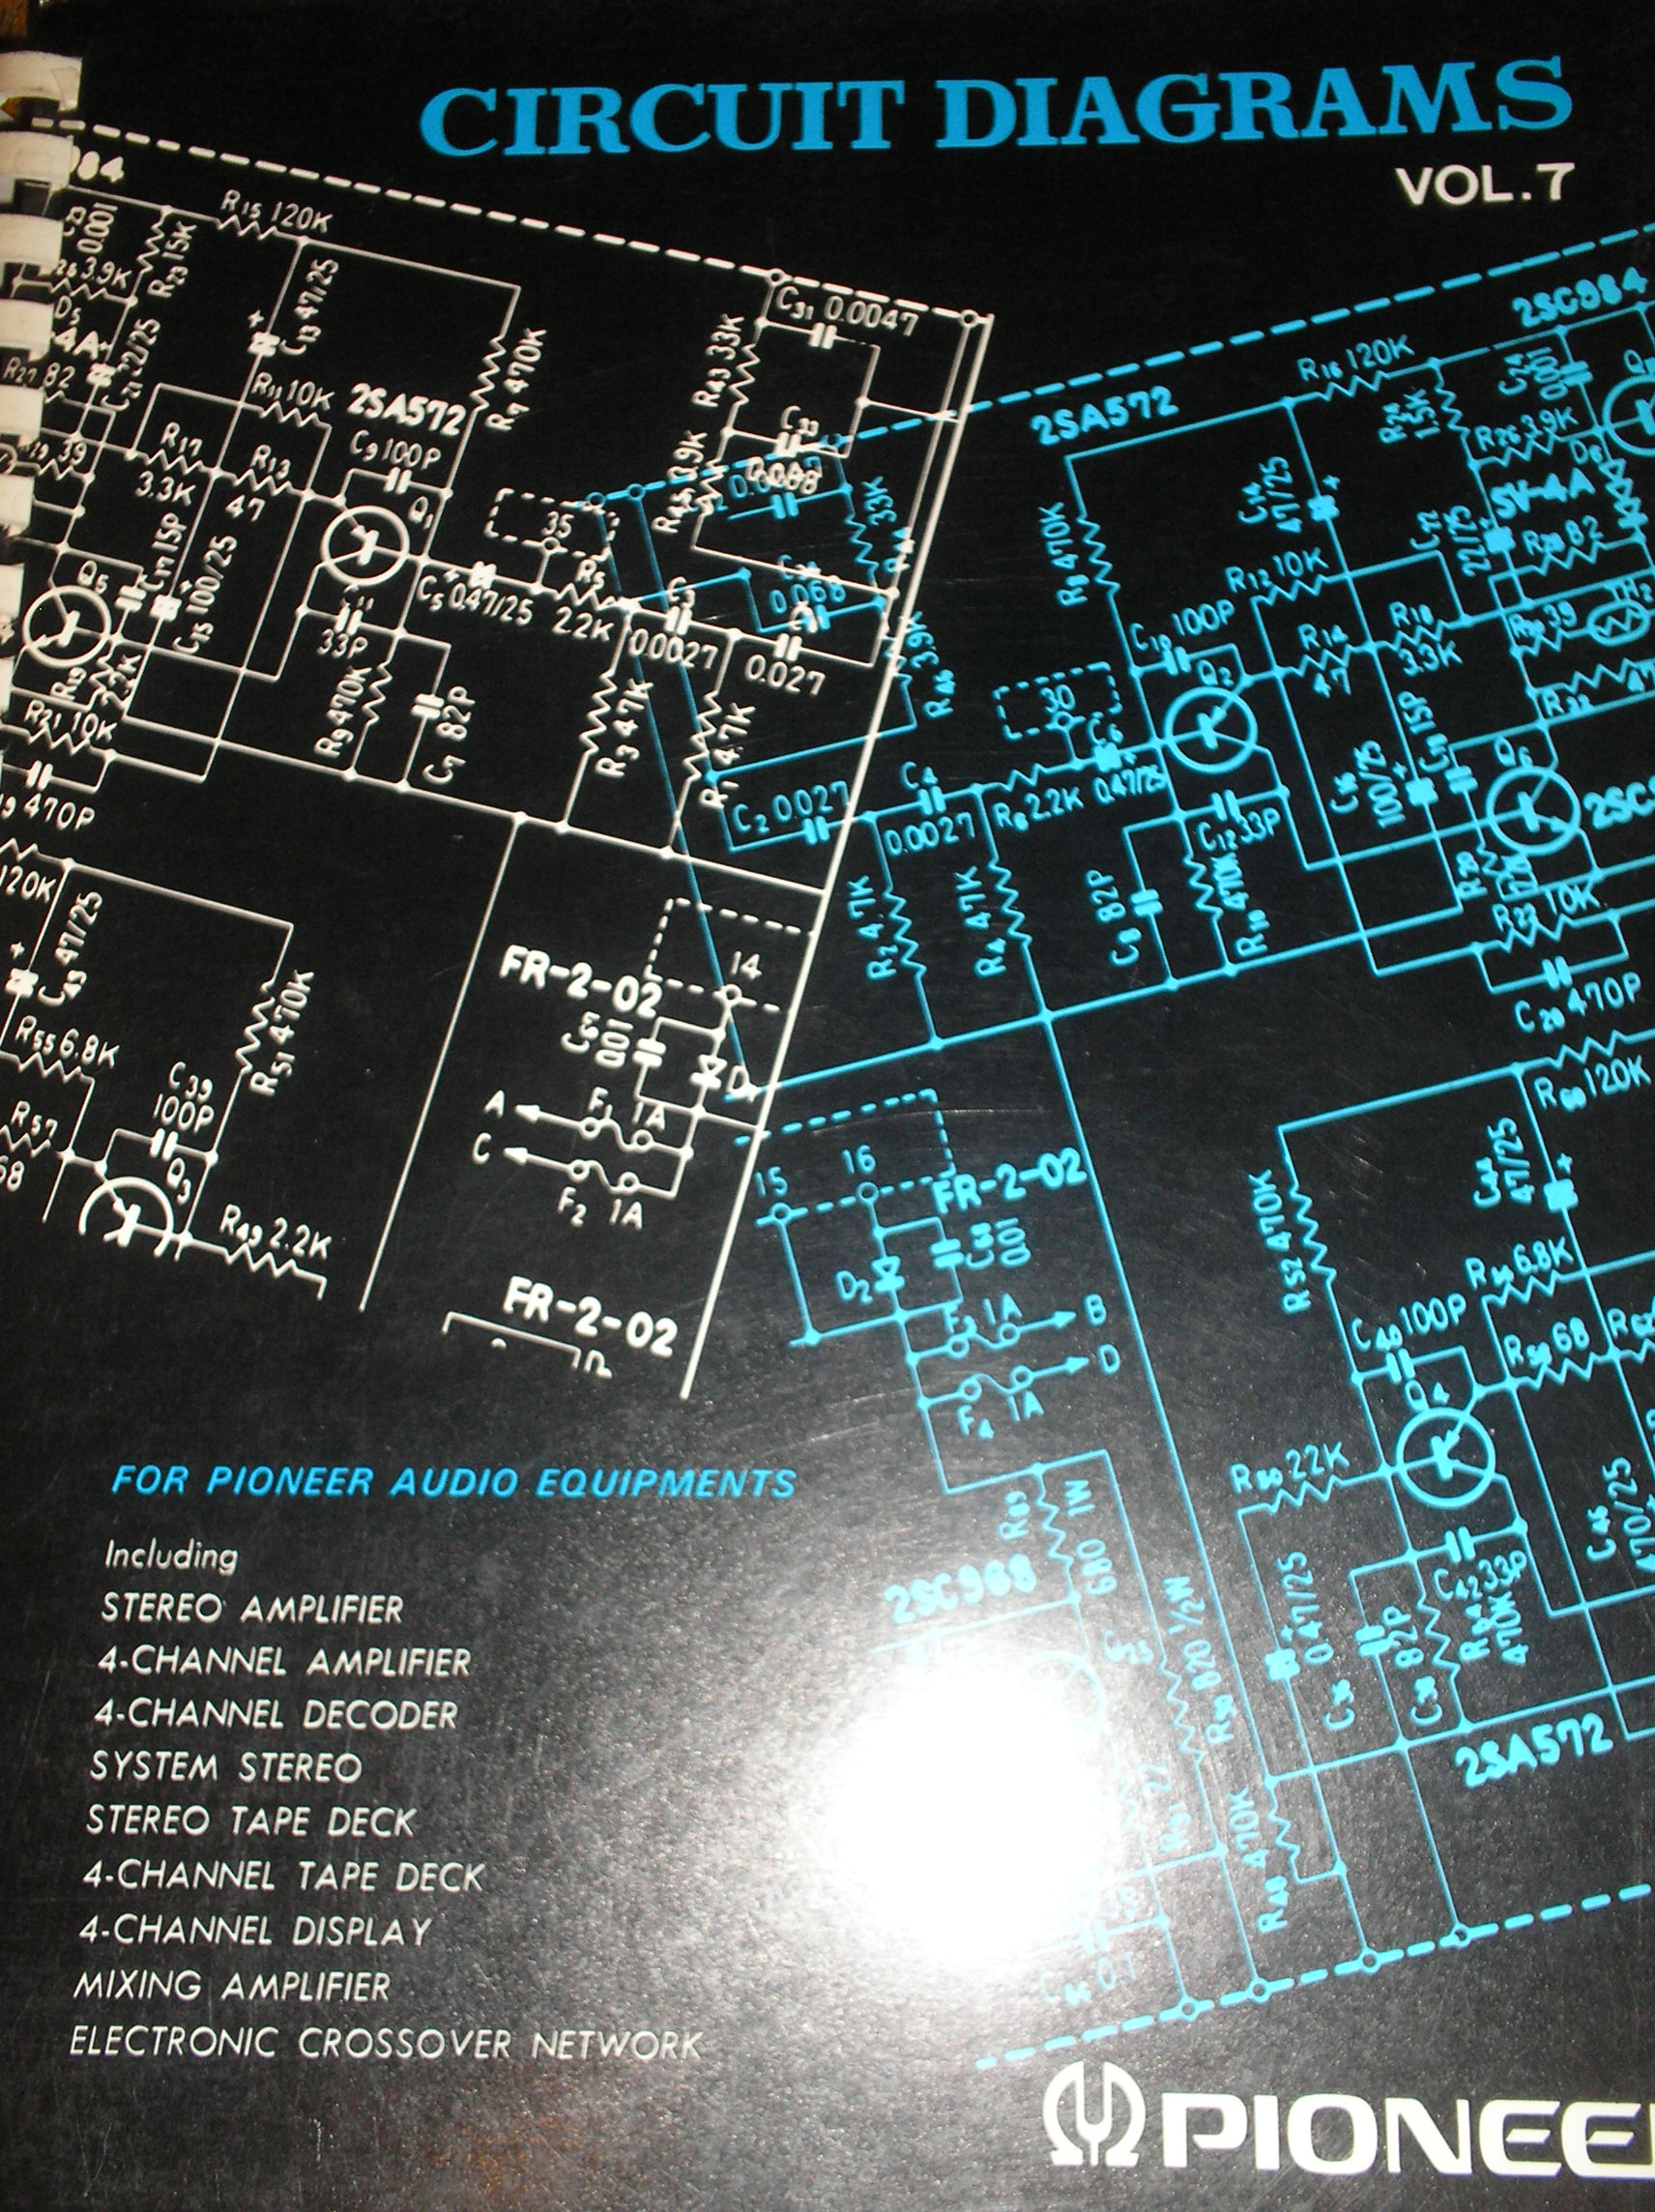 C4600 Stereo System fold out schematics.   Book 7